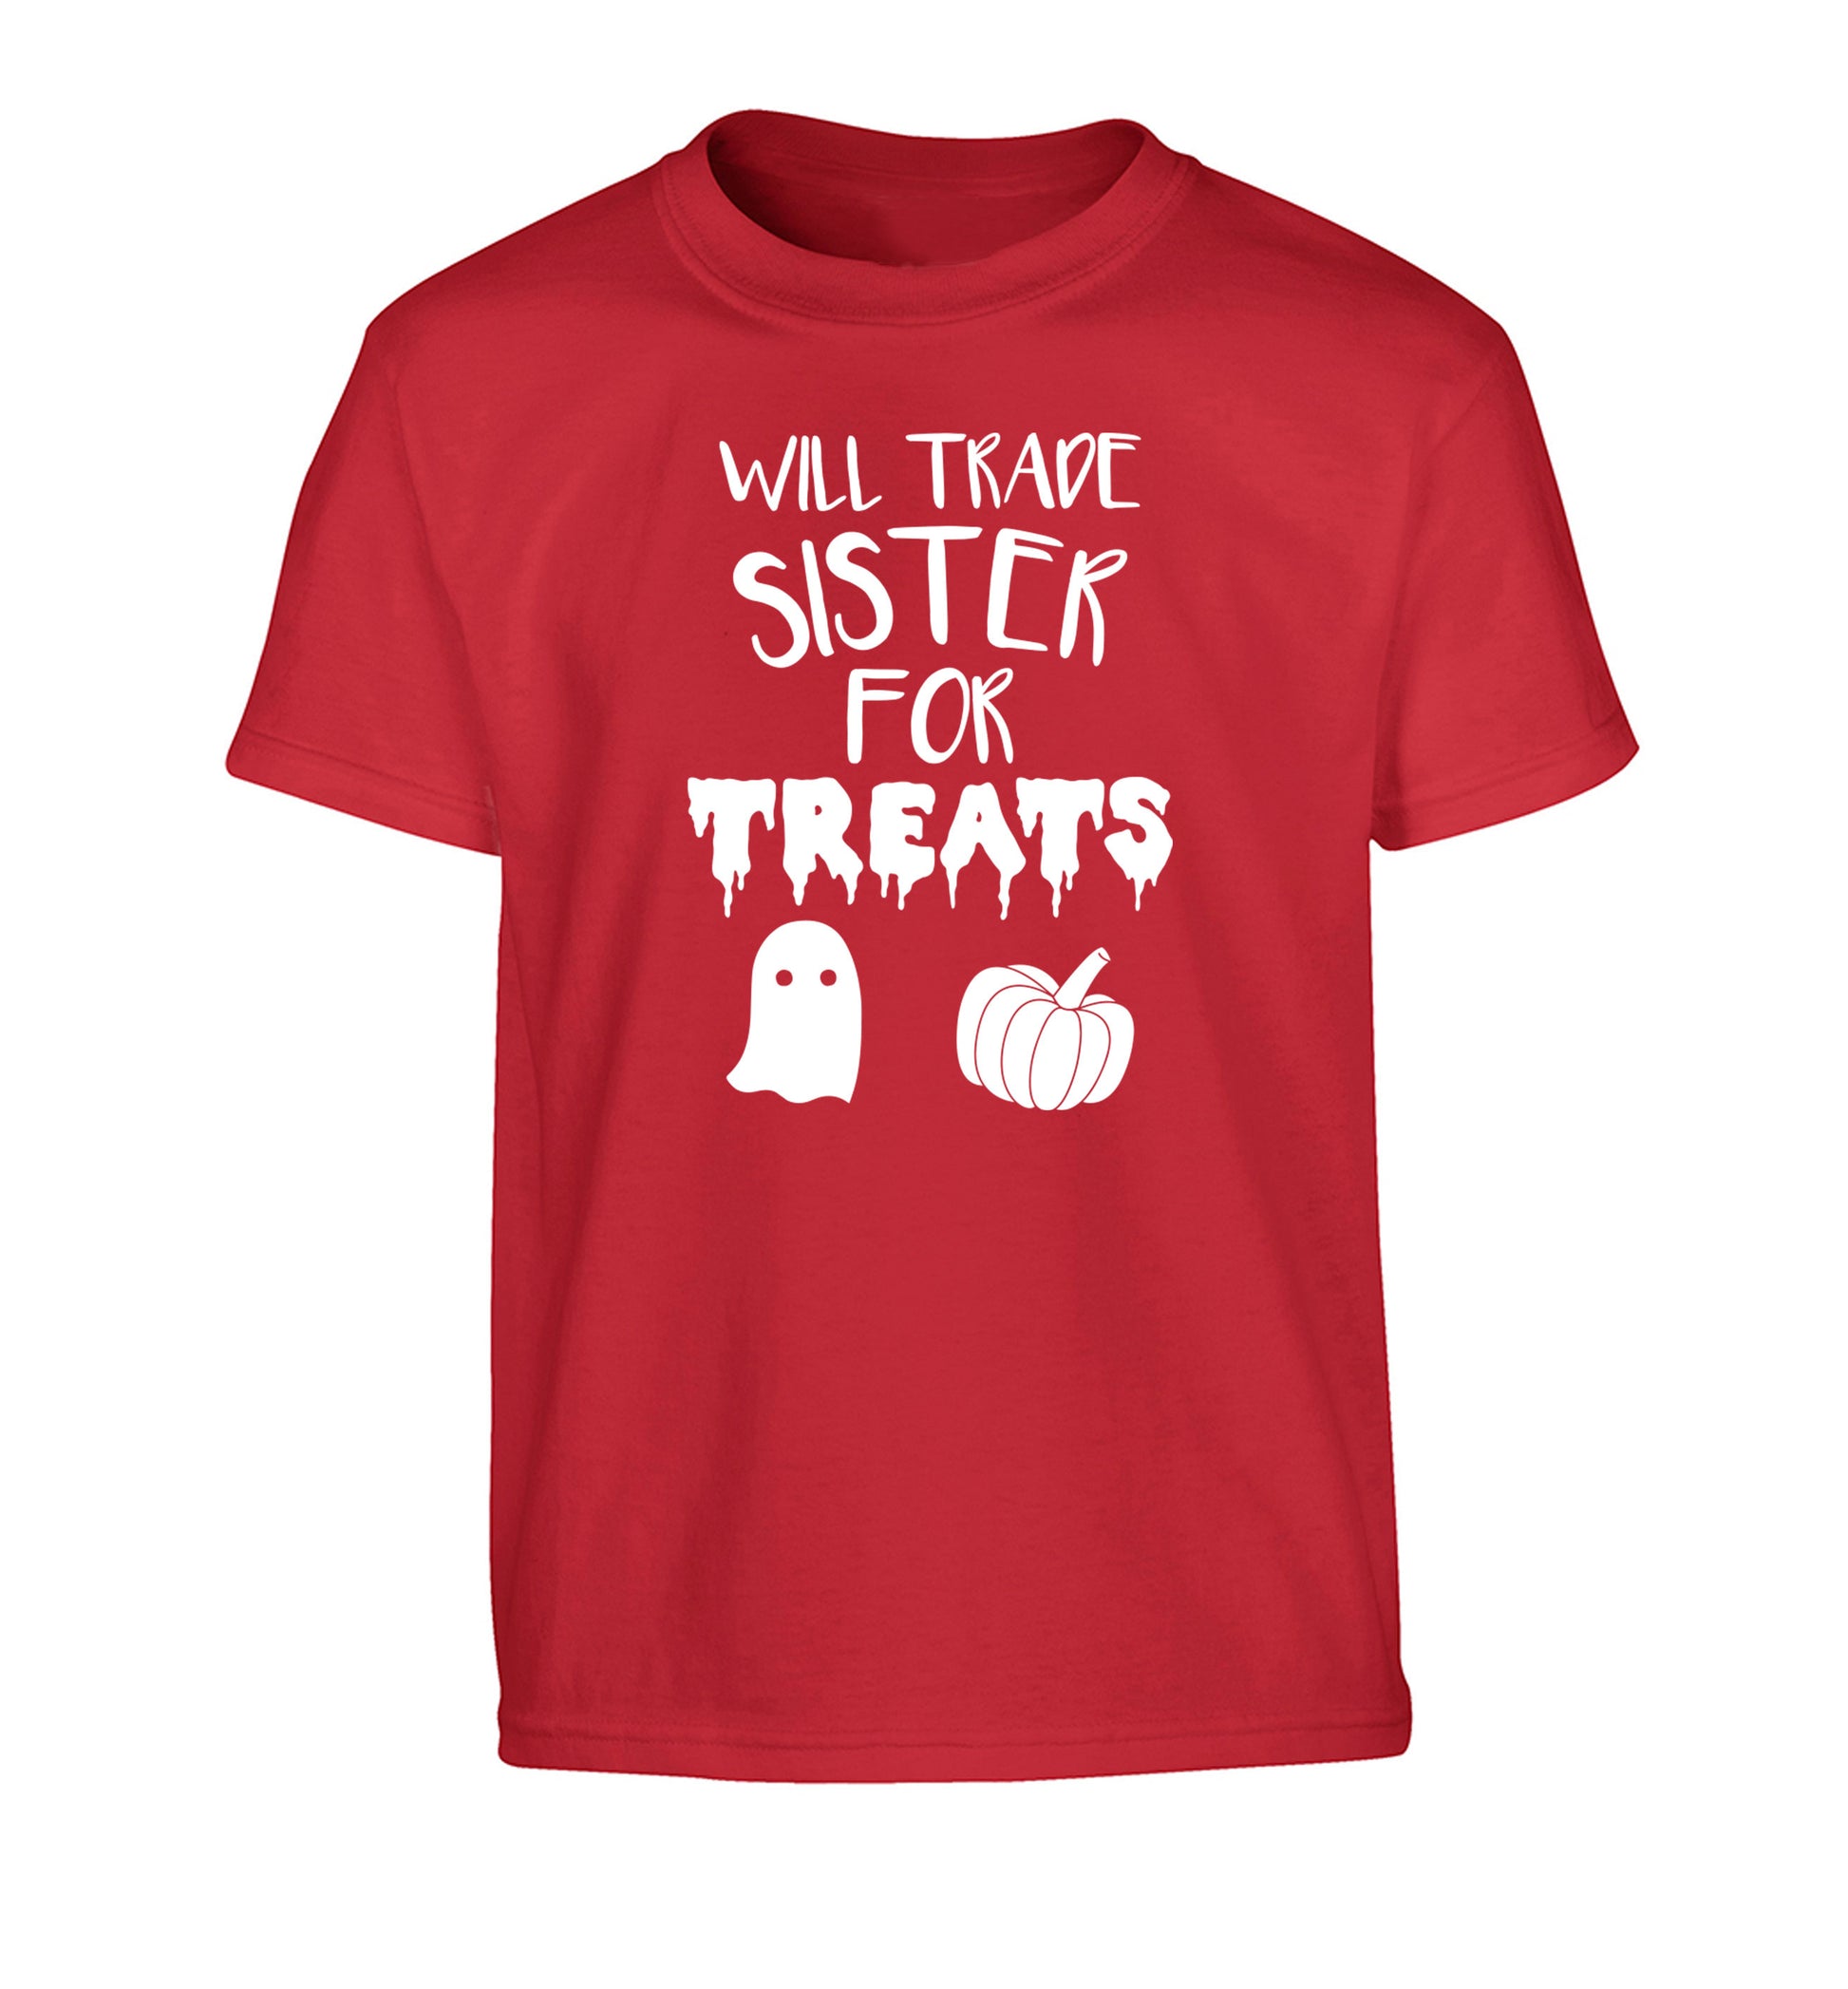 Will trade sister for treats Children's red Tshirt 12-14 Years